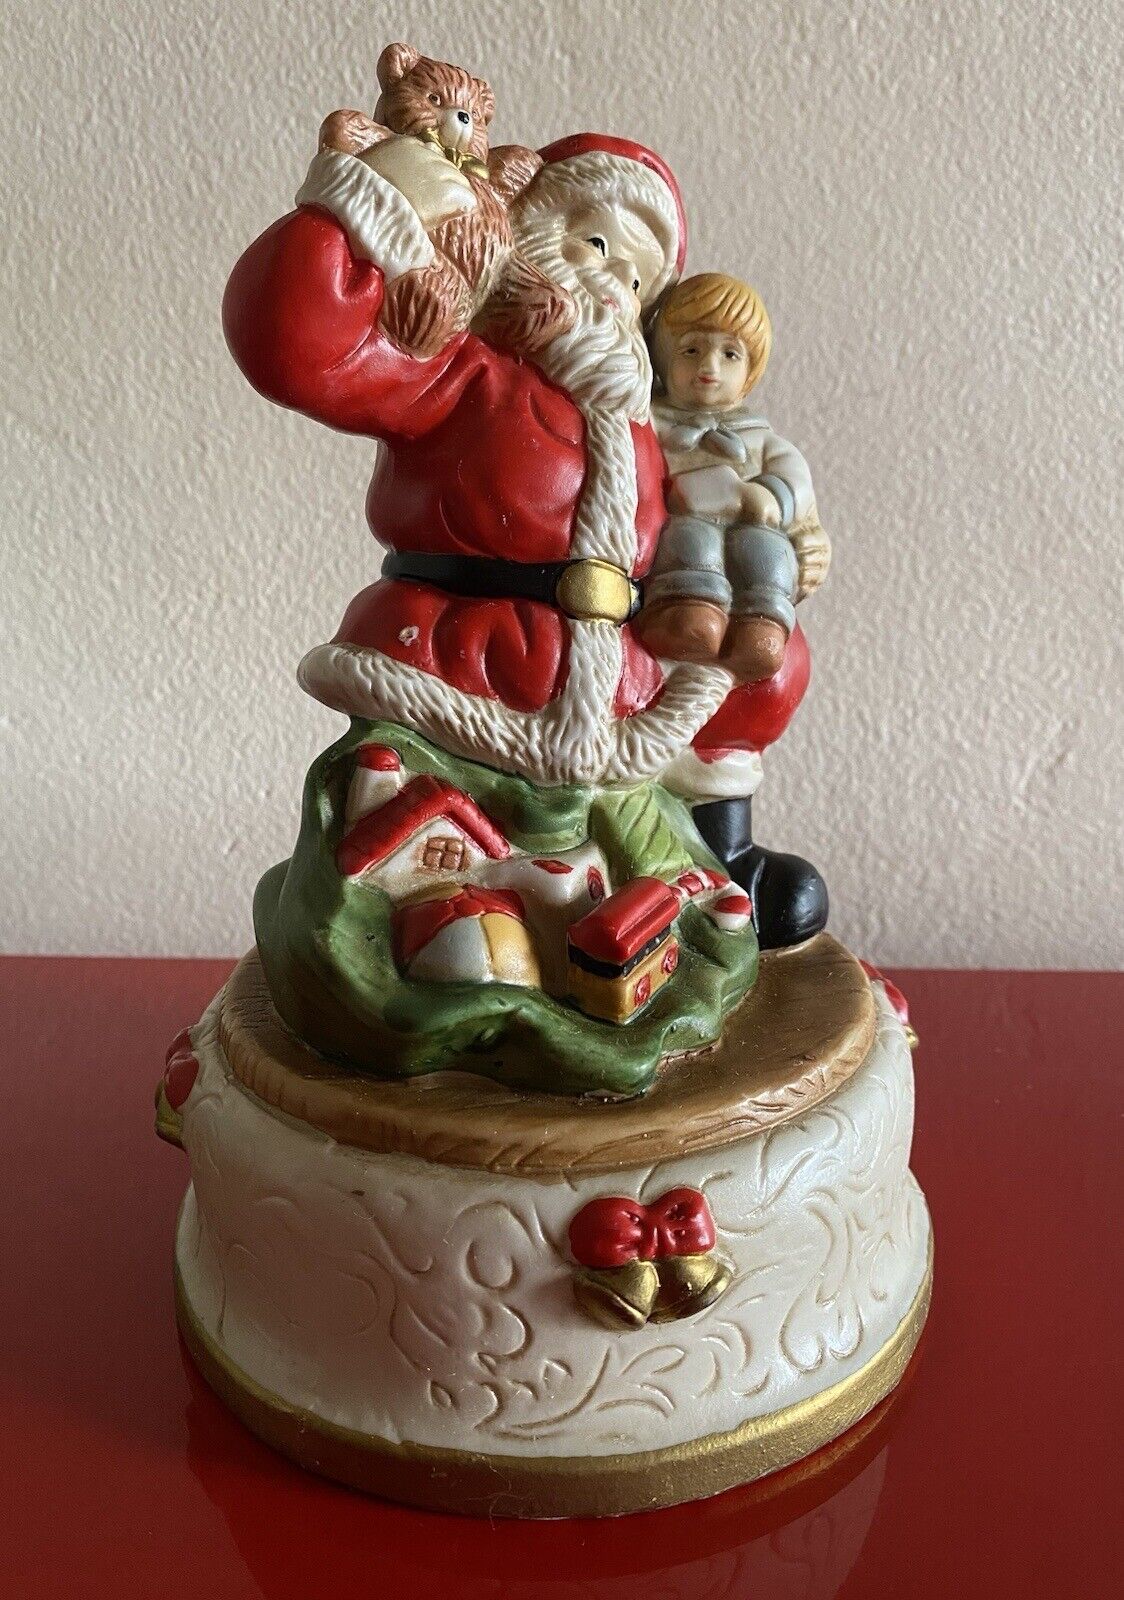 Vintage Share the Joy Musical Santa Claus Plays “Santa Claus Is Coming to Town”